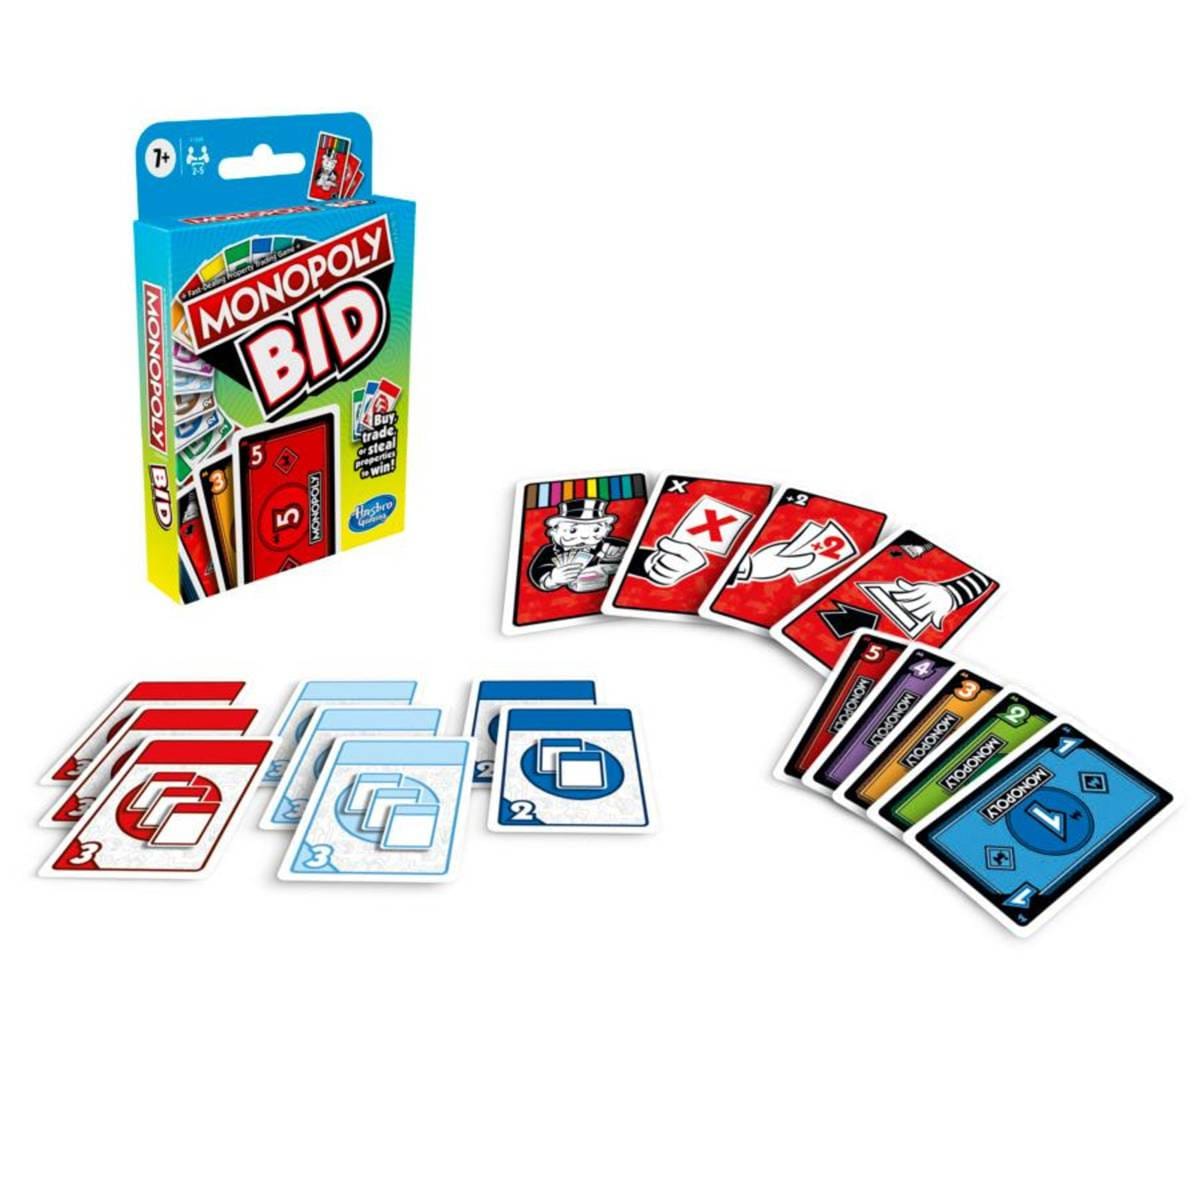 HASBRO Monopoly Bid: The Monopoly Bid game is a game of chance, luck, and strategy as players bid in blind auctions - F1699